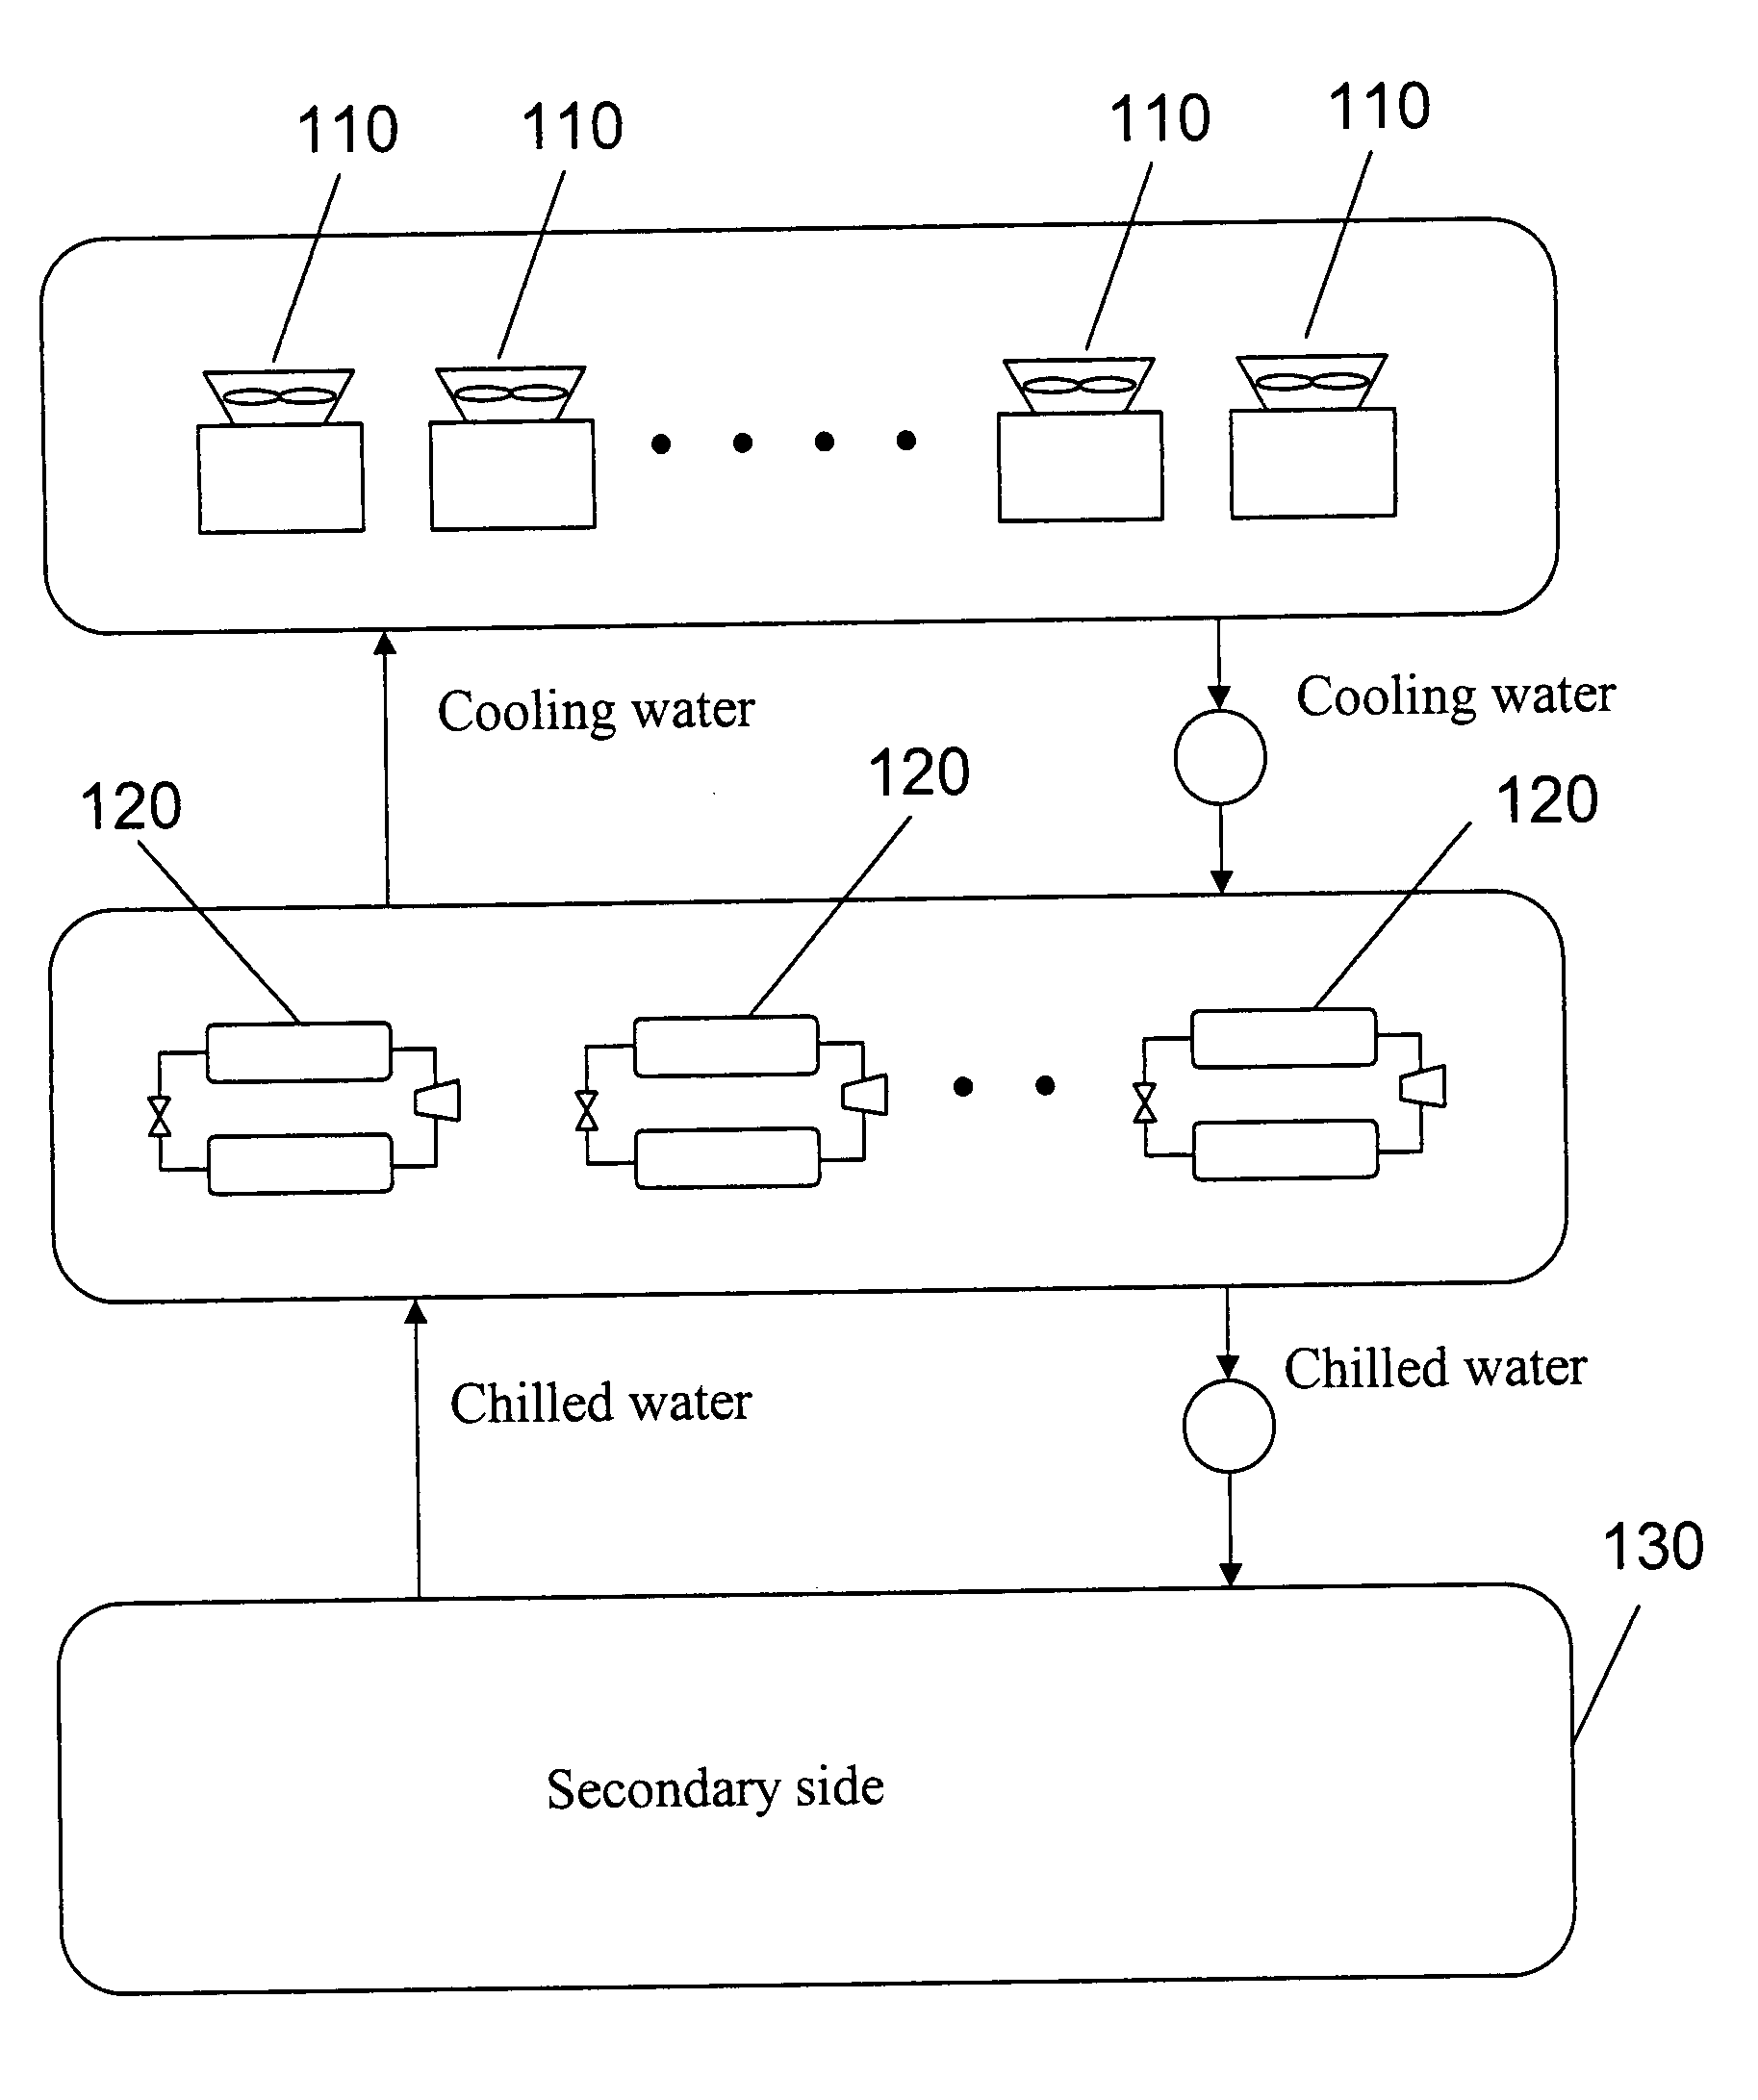 Method for evaluating and optimizing performance of chiller system